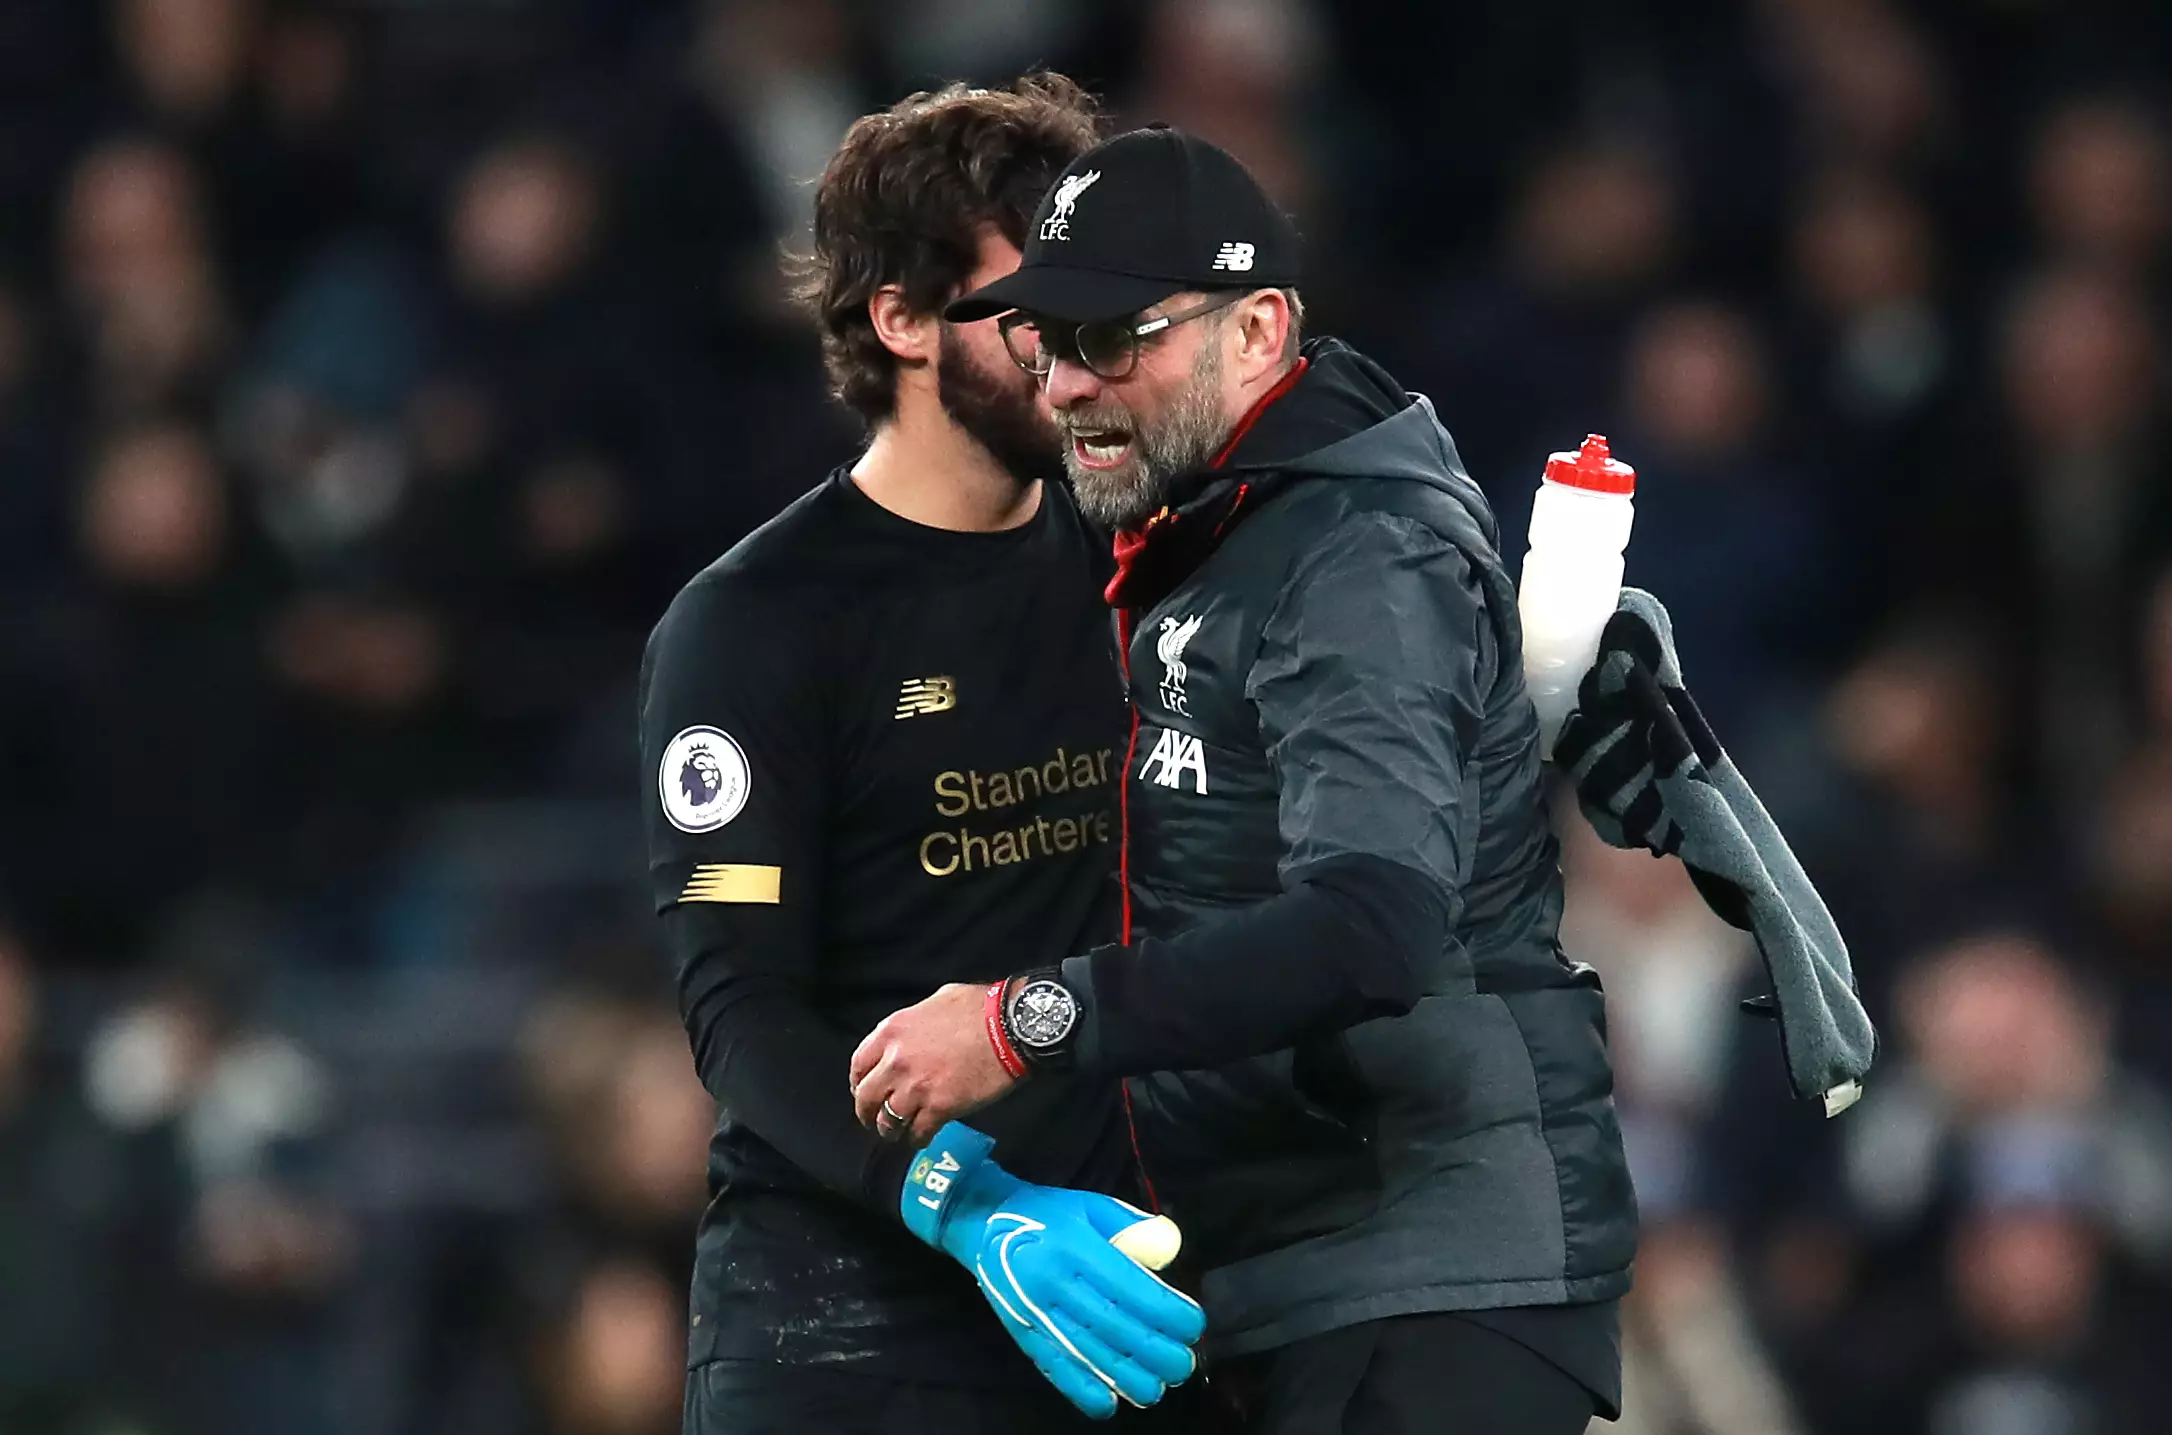 Jurgen Klopp's Liverpool team are on an incredible run that's seen them move 16 points clear at the top